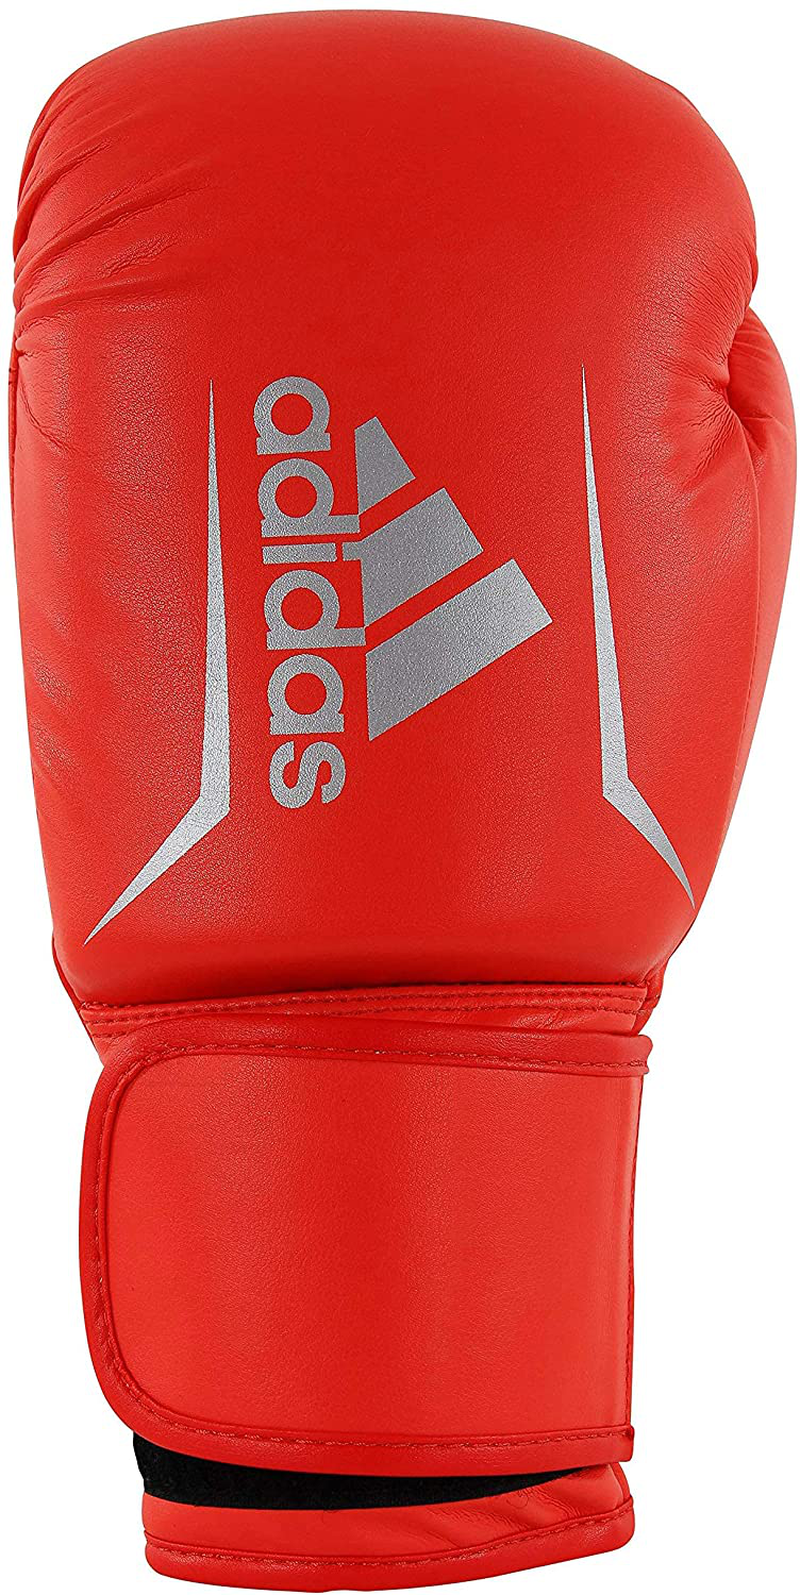 Men/Wome for 50 FLX — & Kickboxing FightersShop 3.0 Gloves Boxing Boxing Speed Adidas